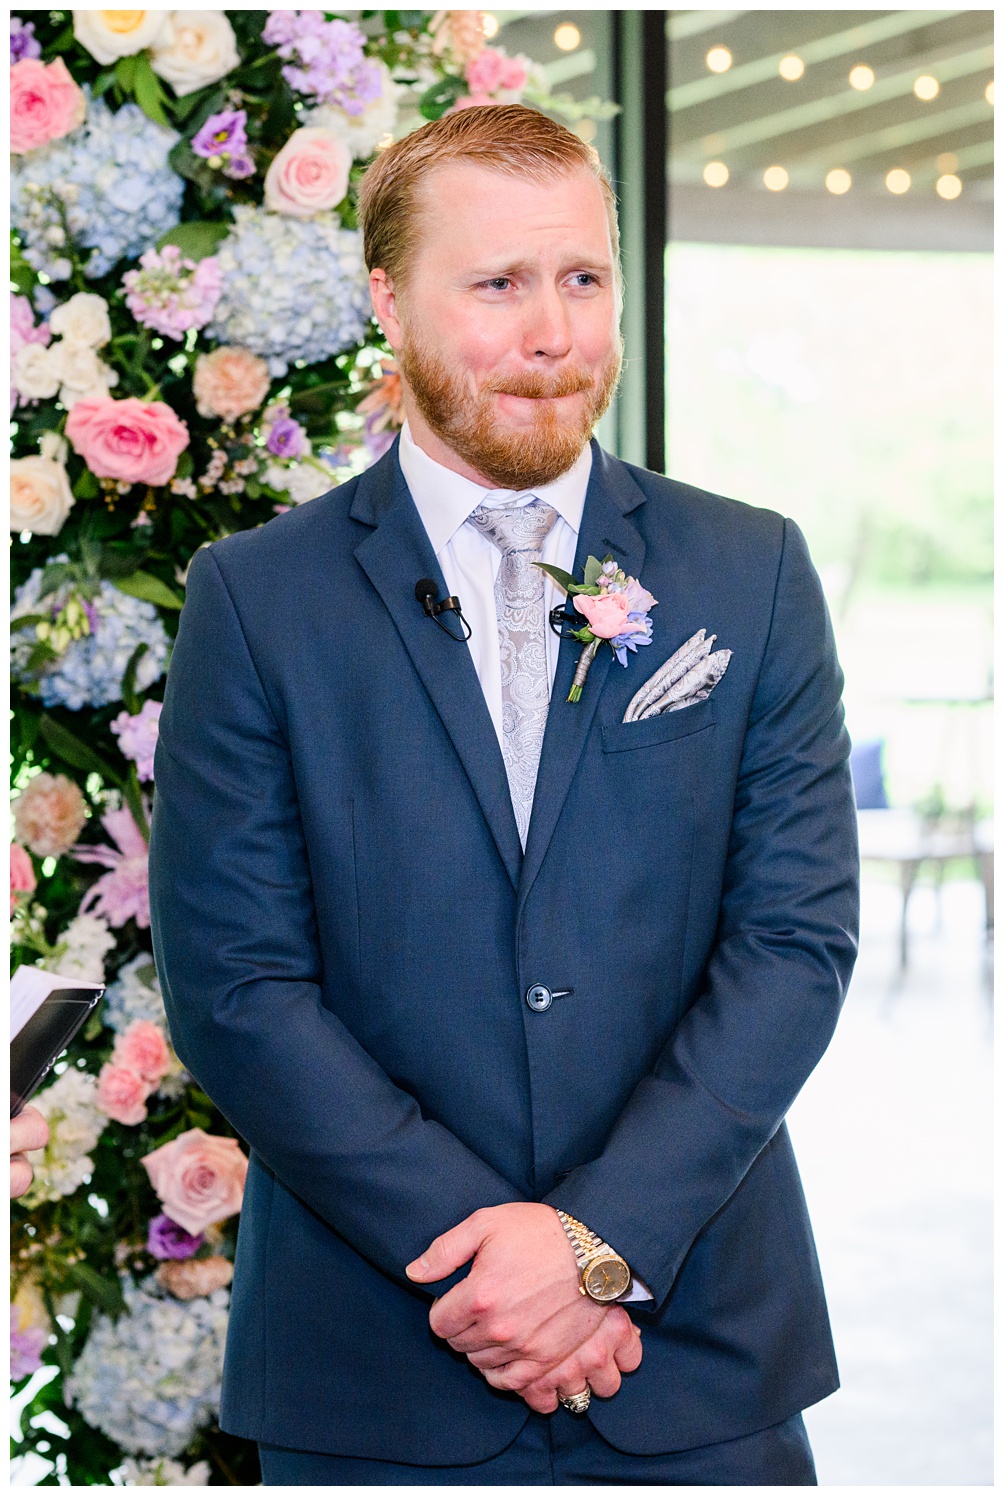 Groom reacts to seeing bride for the first time on their wedding day at Pecan Springs Ranch in Austin Texas